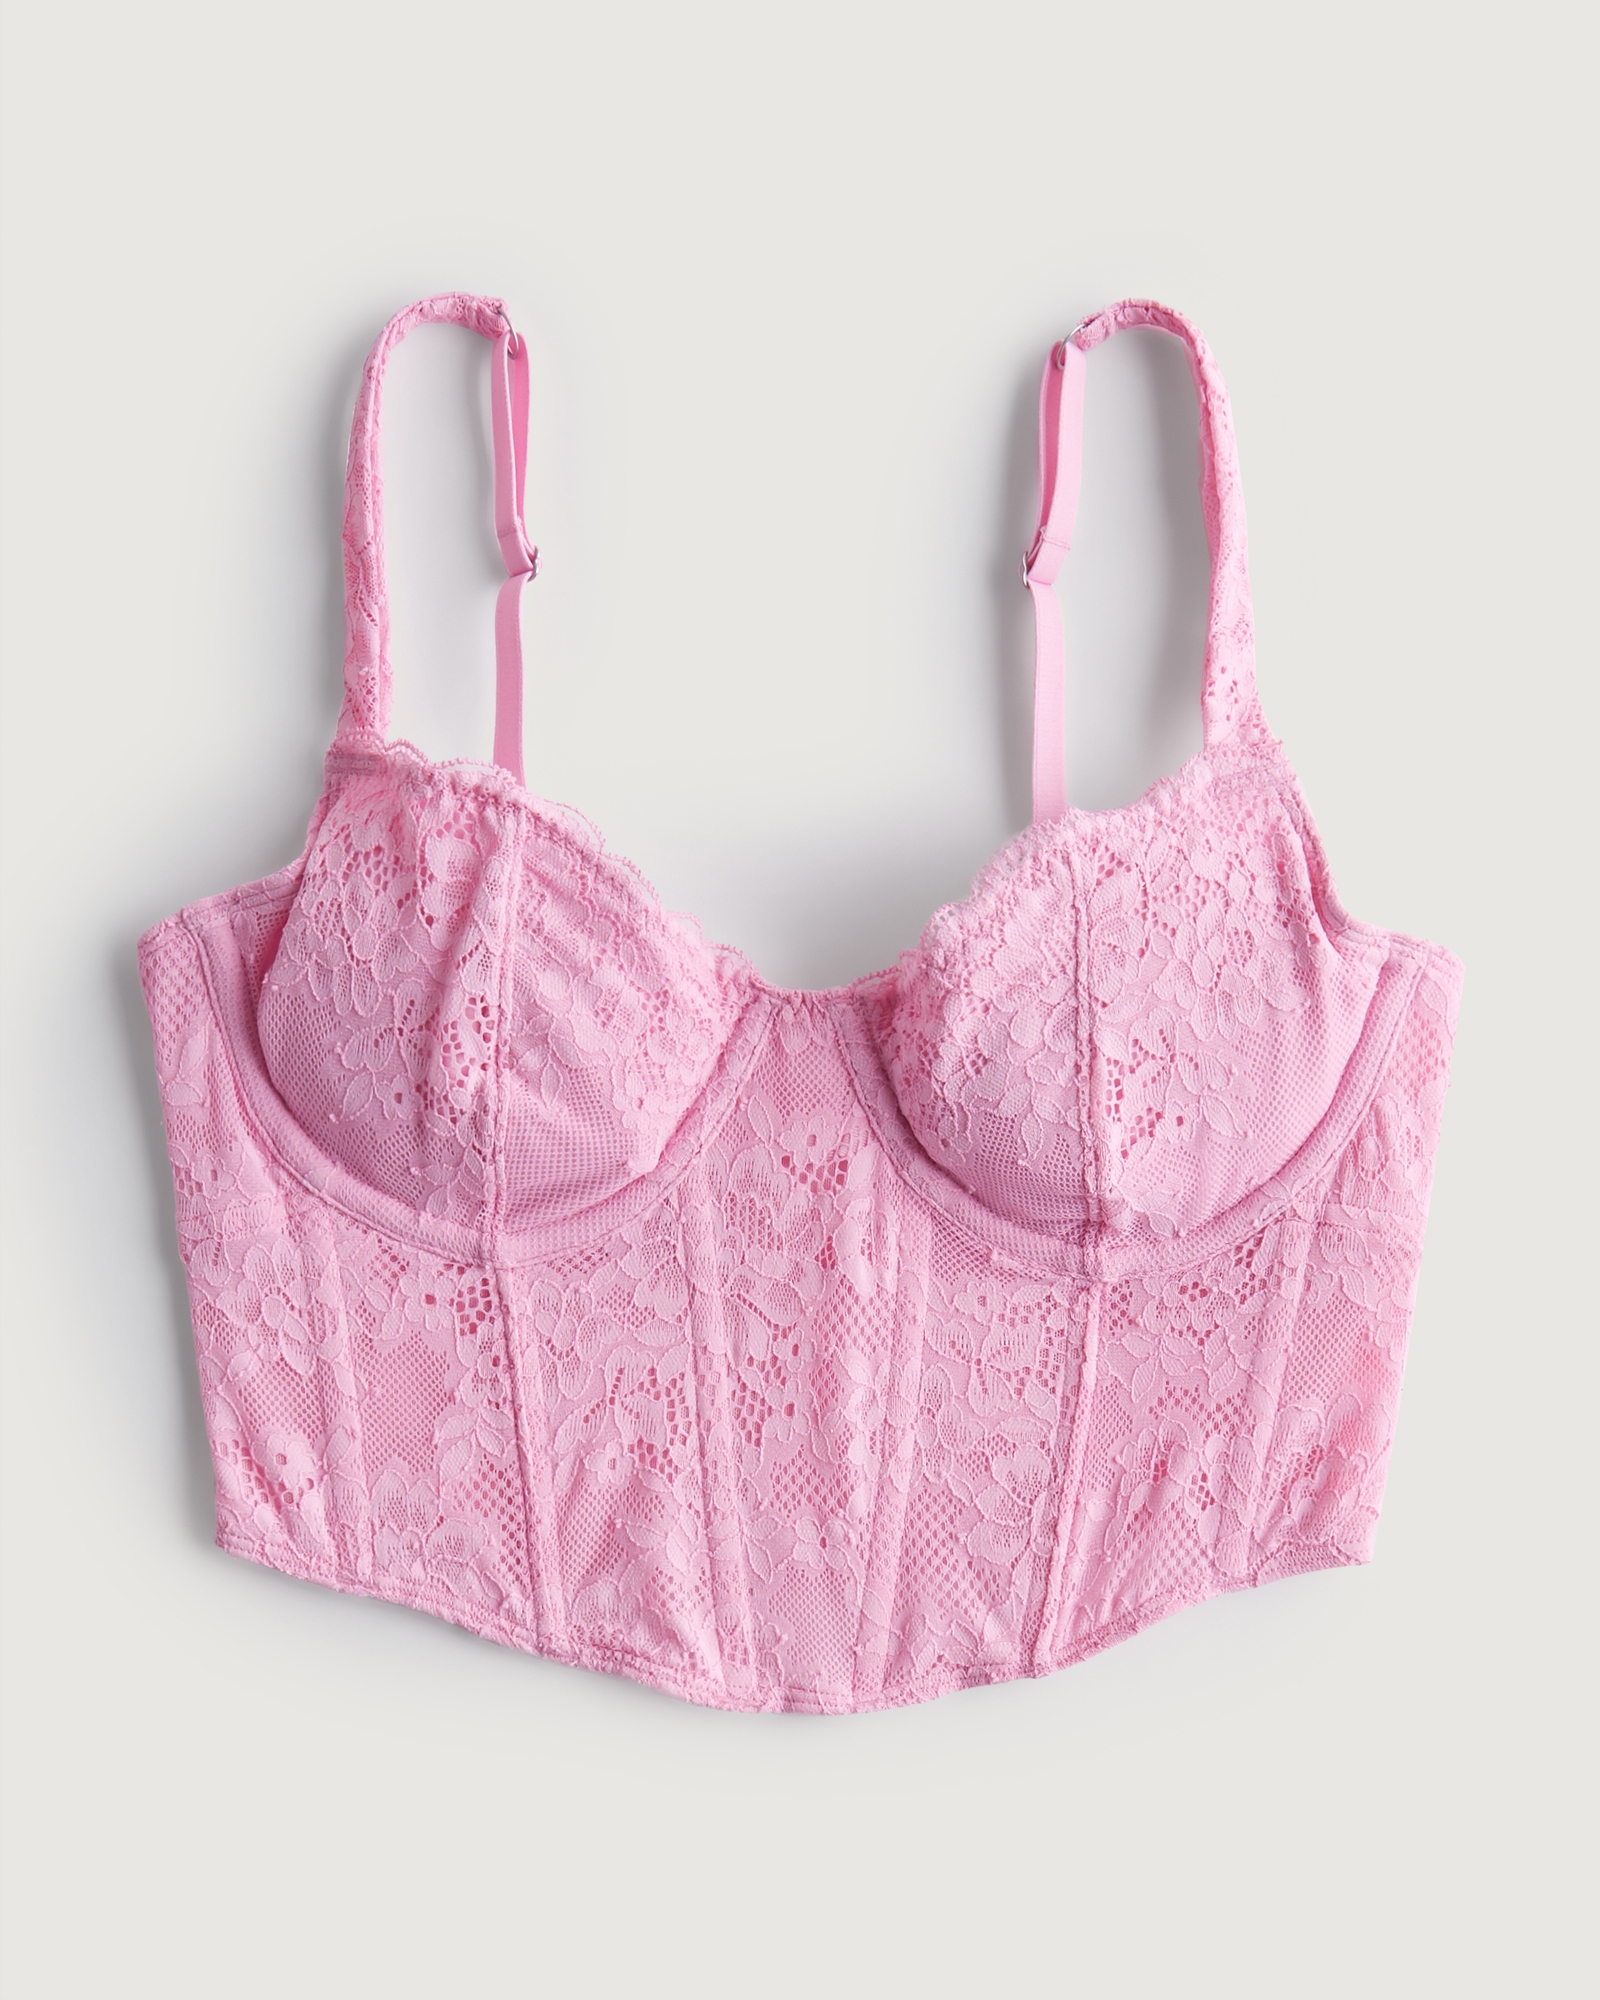 Gilly Hicks Bralette Pink - $6 - From Grace